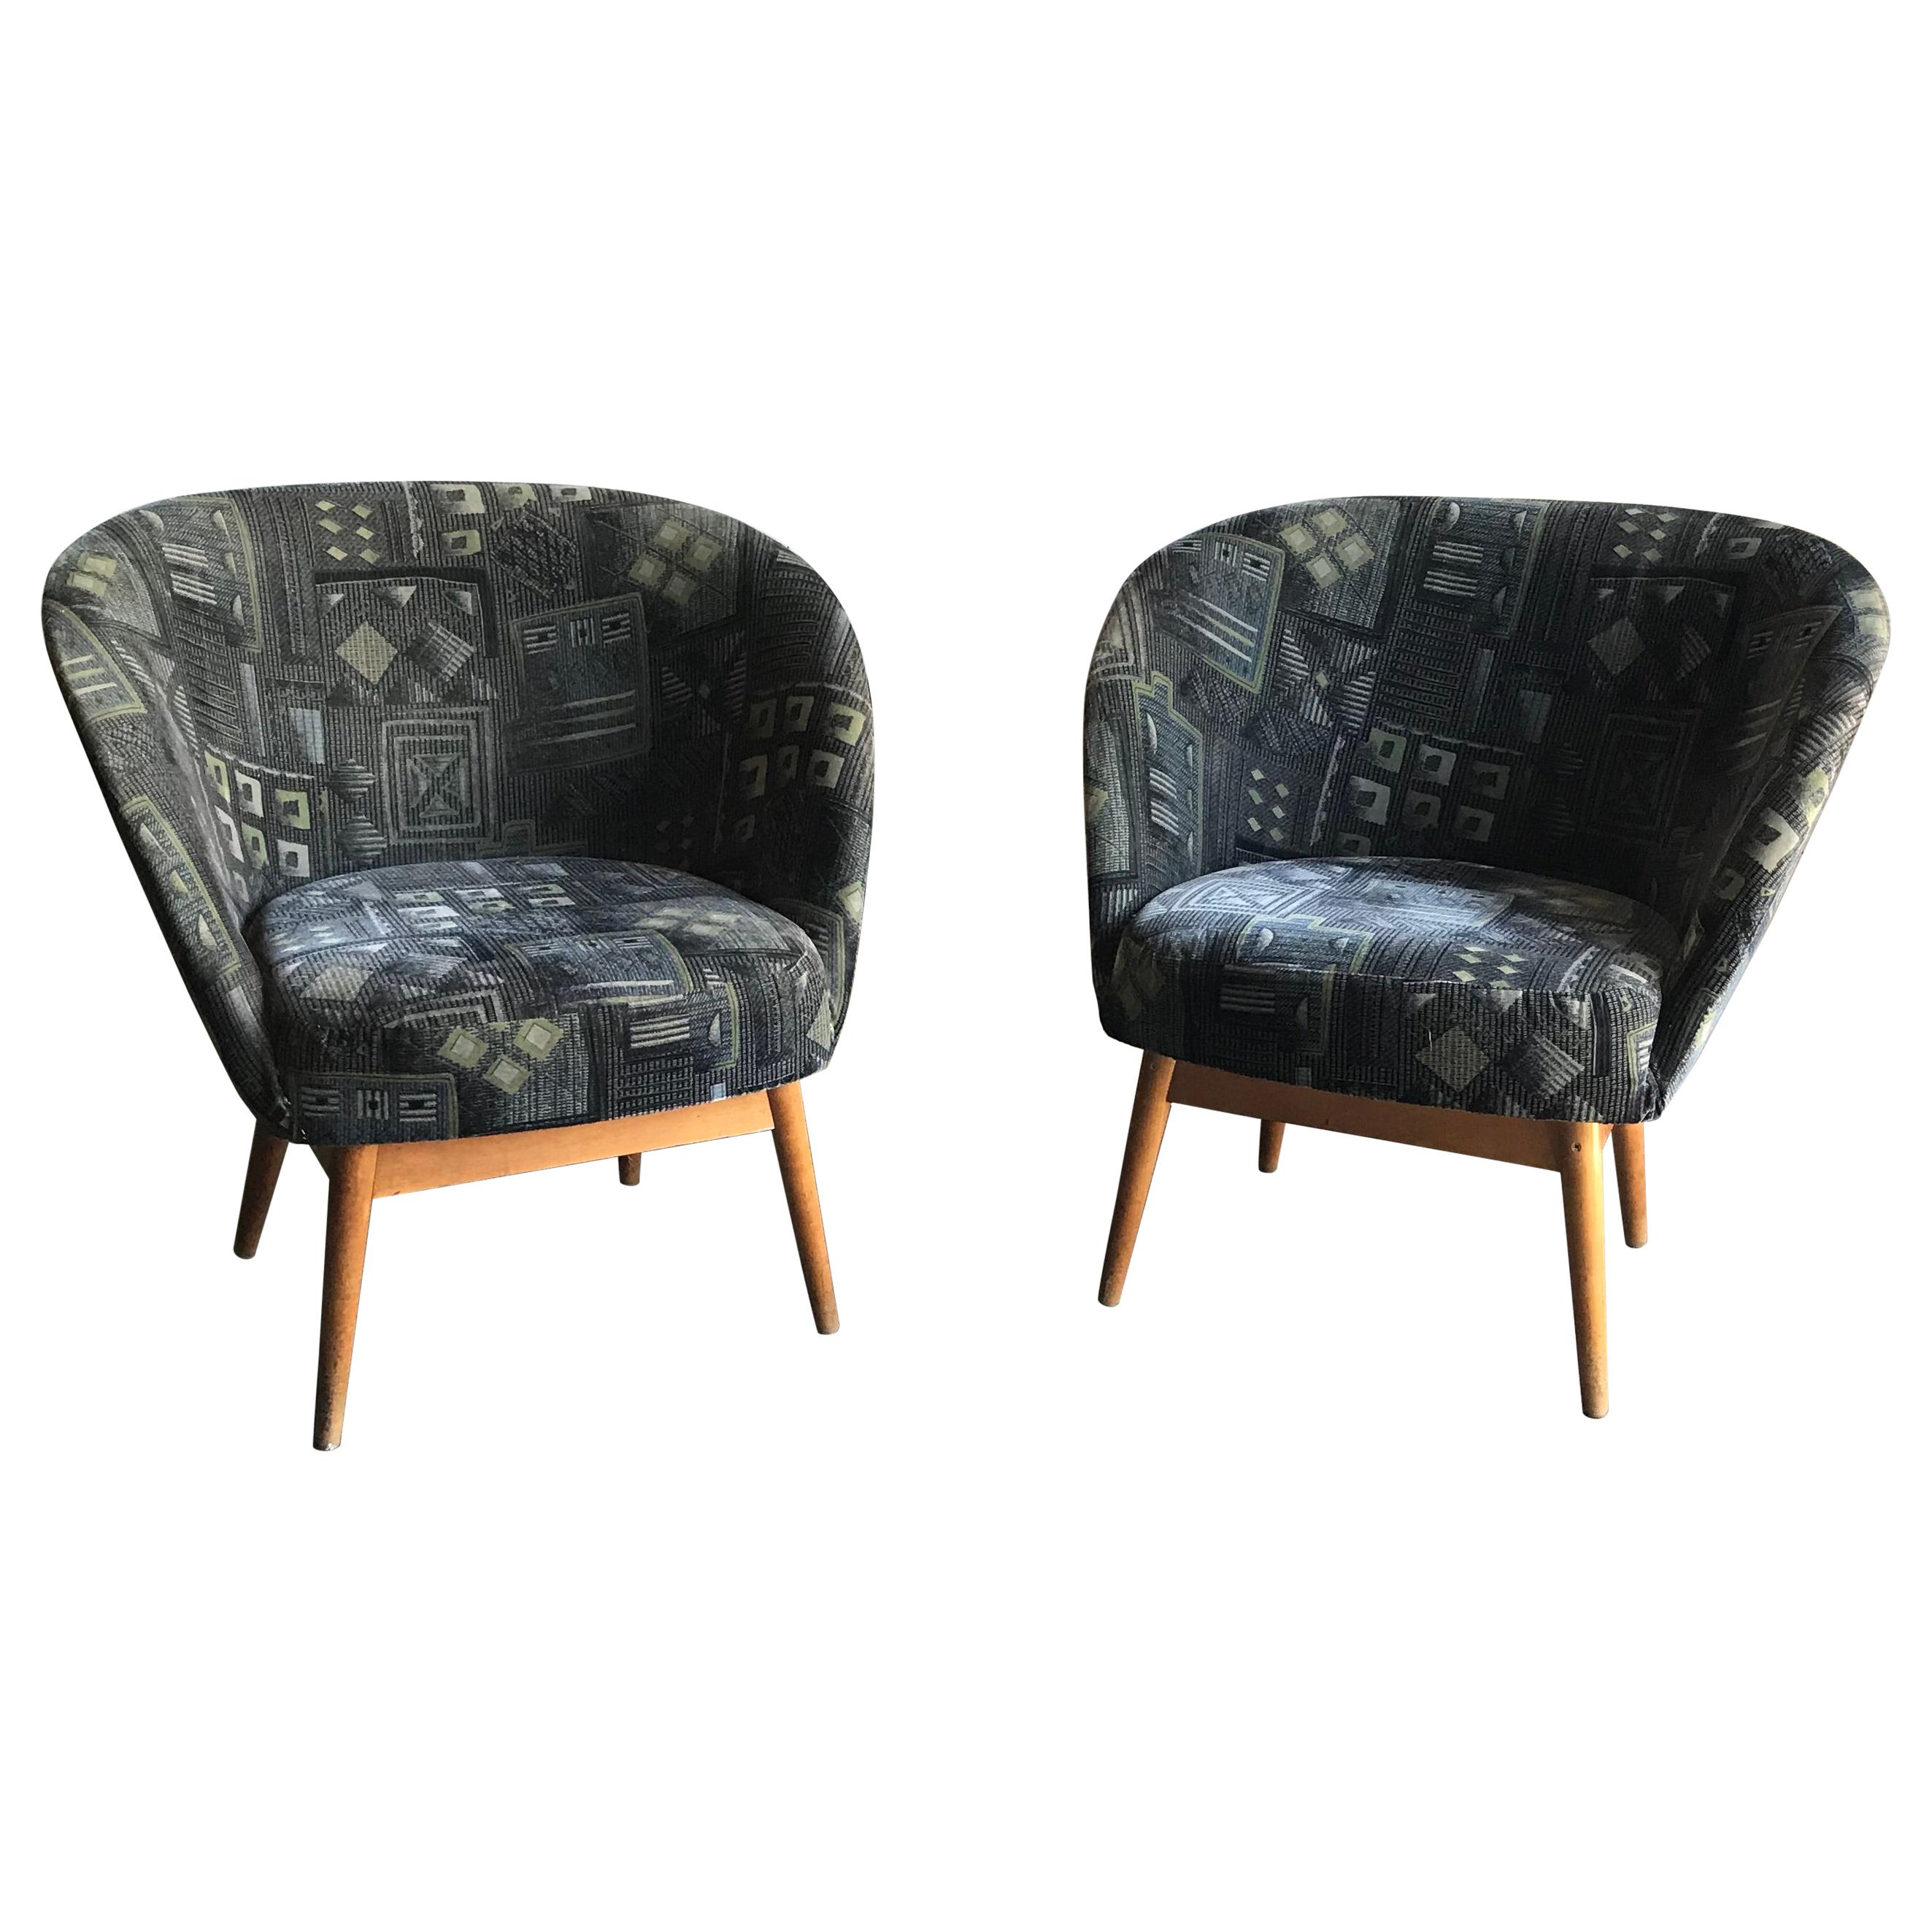 Vintage Danish Style Armchairs, 1960s For Sale